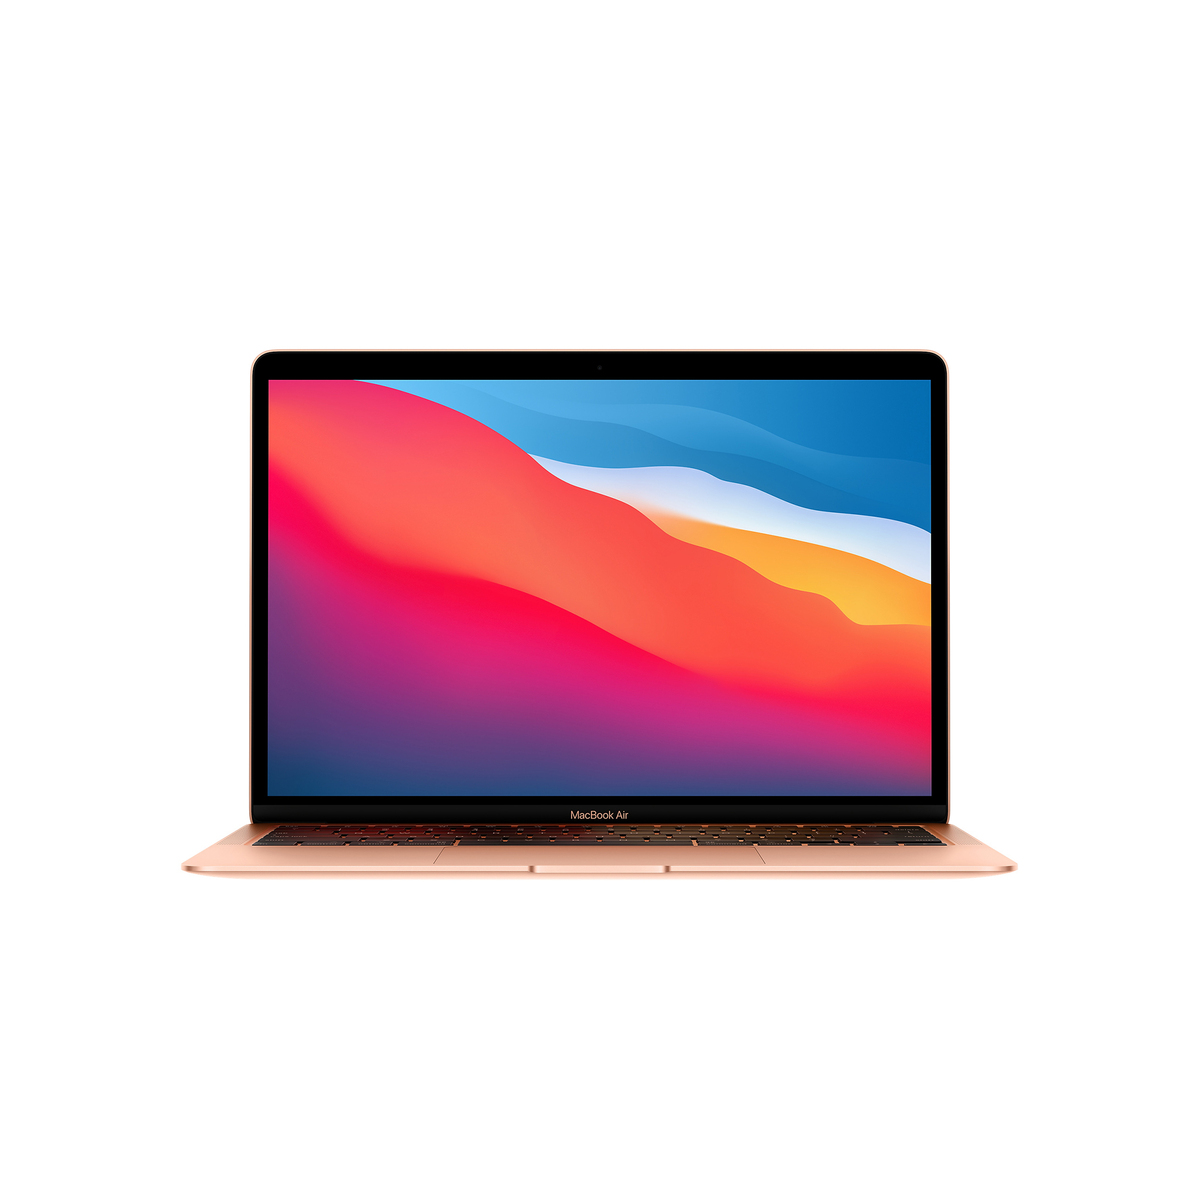 Apple MacBook Air 13"(MGNE3AB/A), Apple M1 chip with 8-core CPU and 8-core GPU, 512GB - Gold